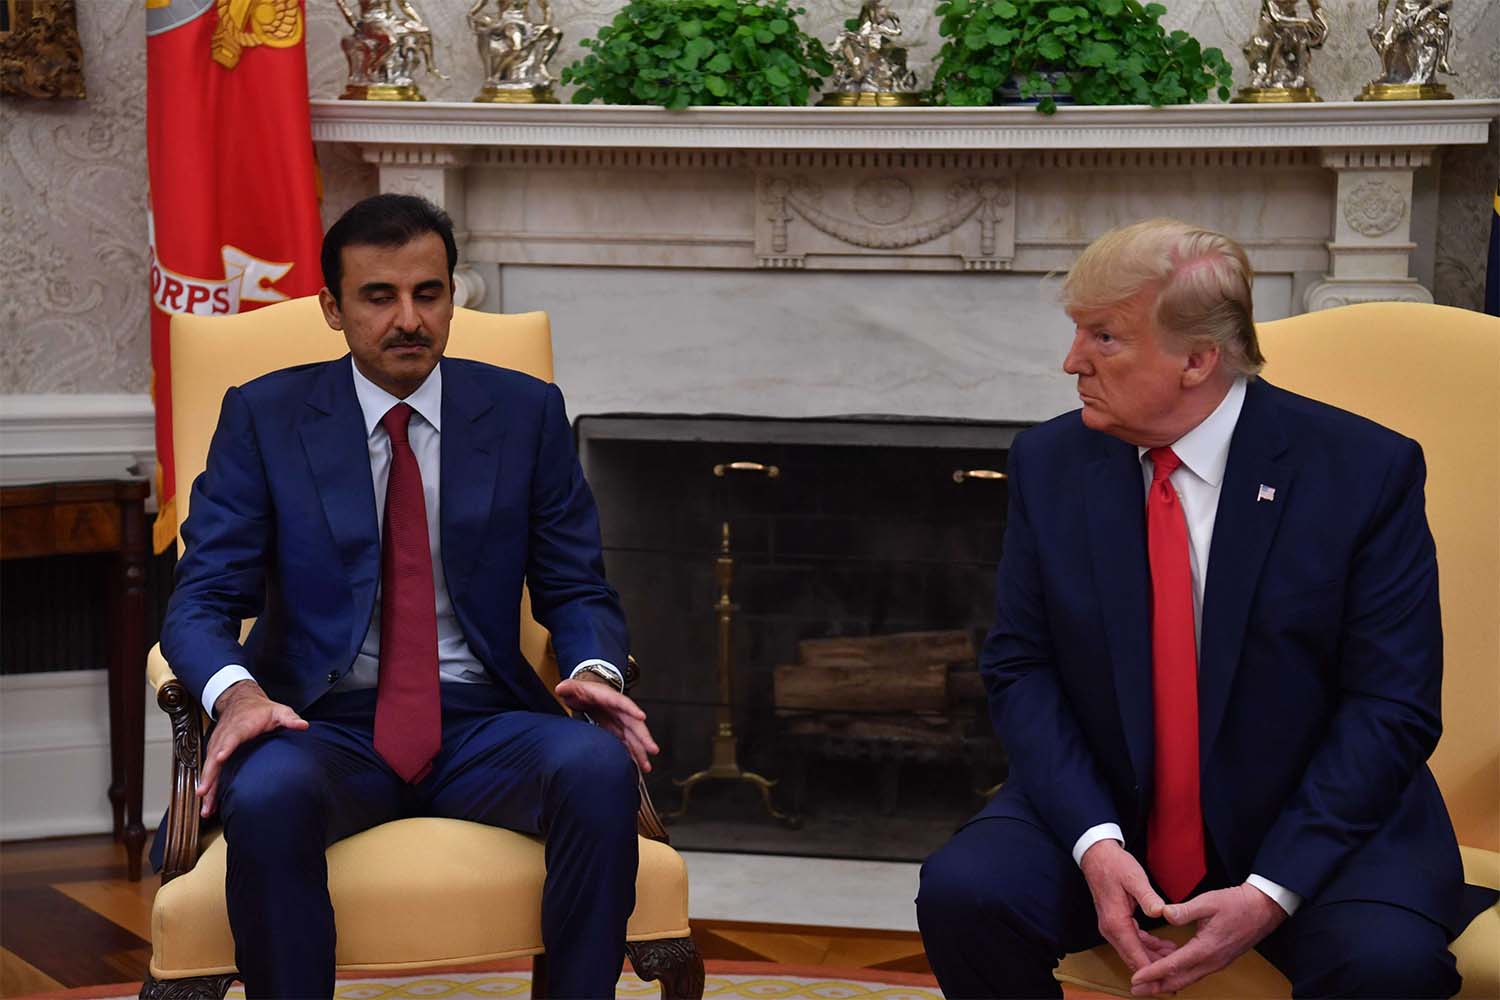 US President Donald Trump meeting with the Emir of Qatar Sheikh Tamim bin Hamad al-Thani in the Oval Office at the White House in Washington